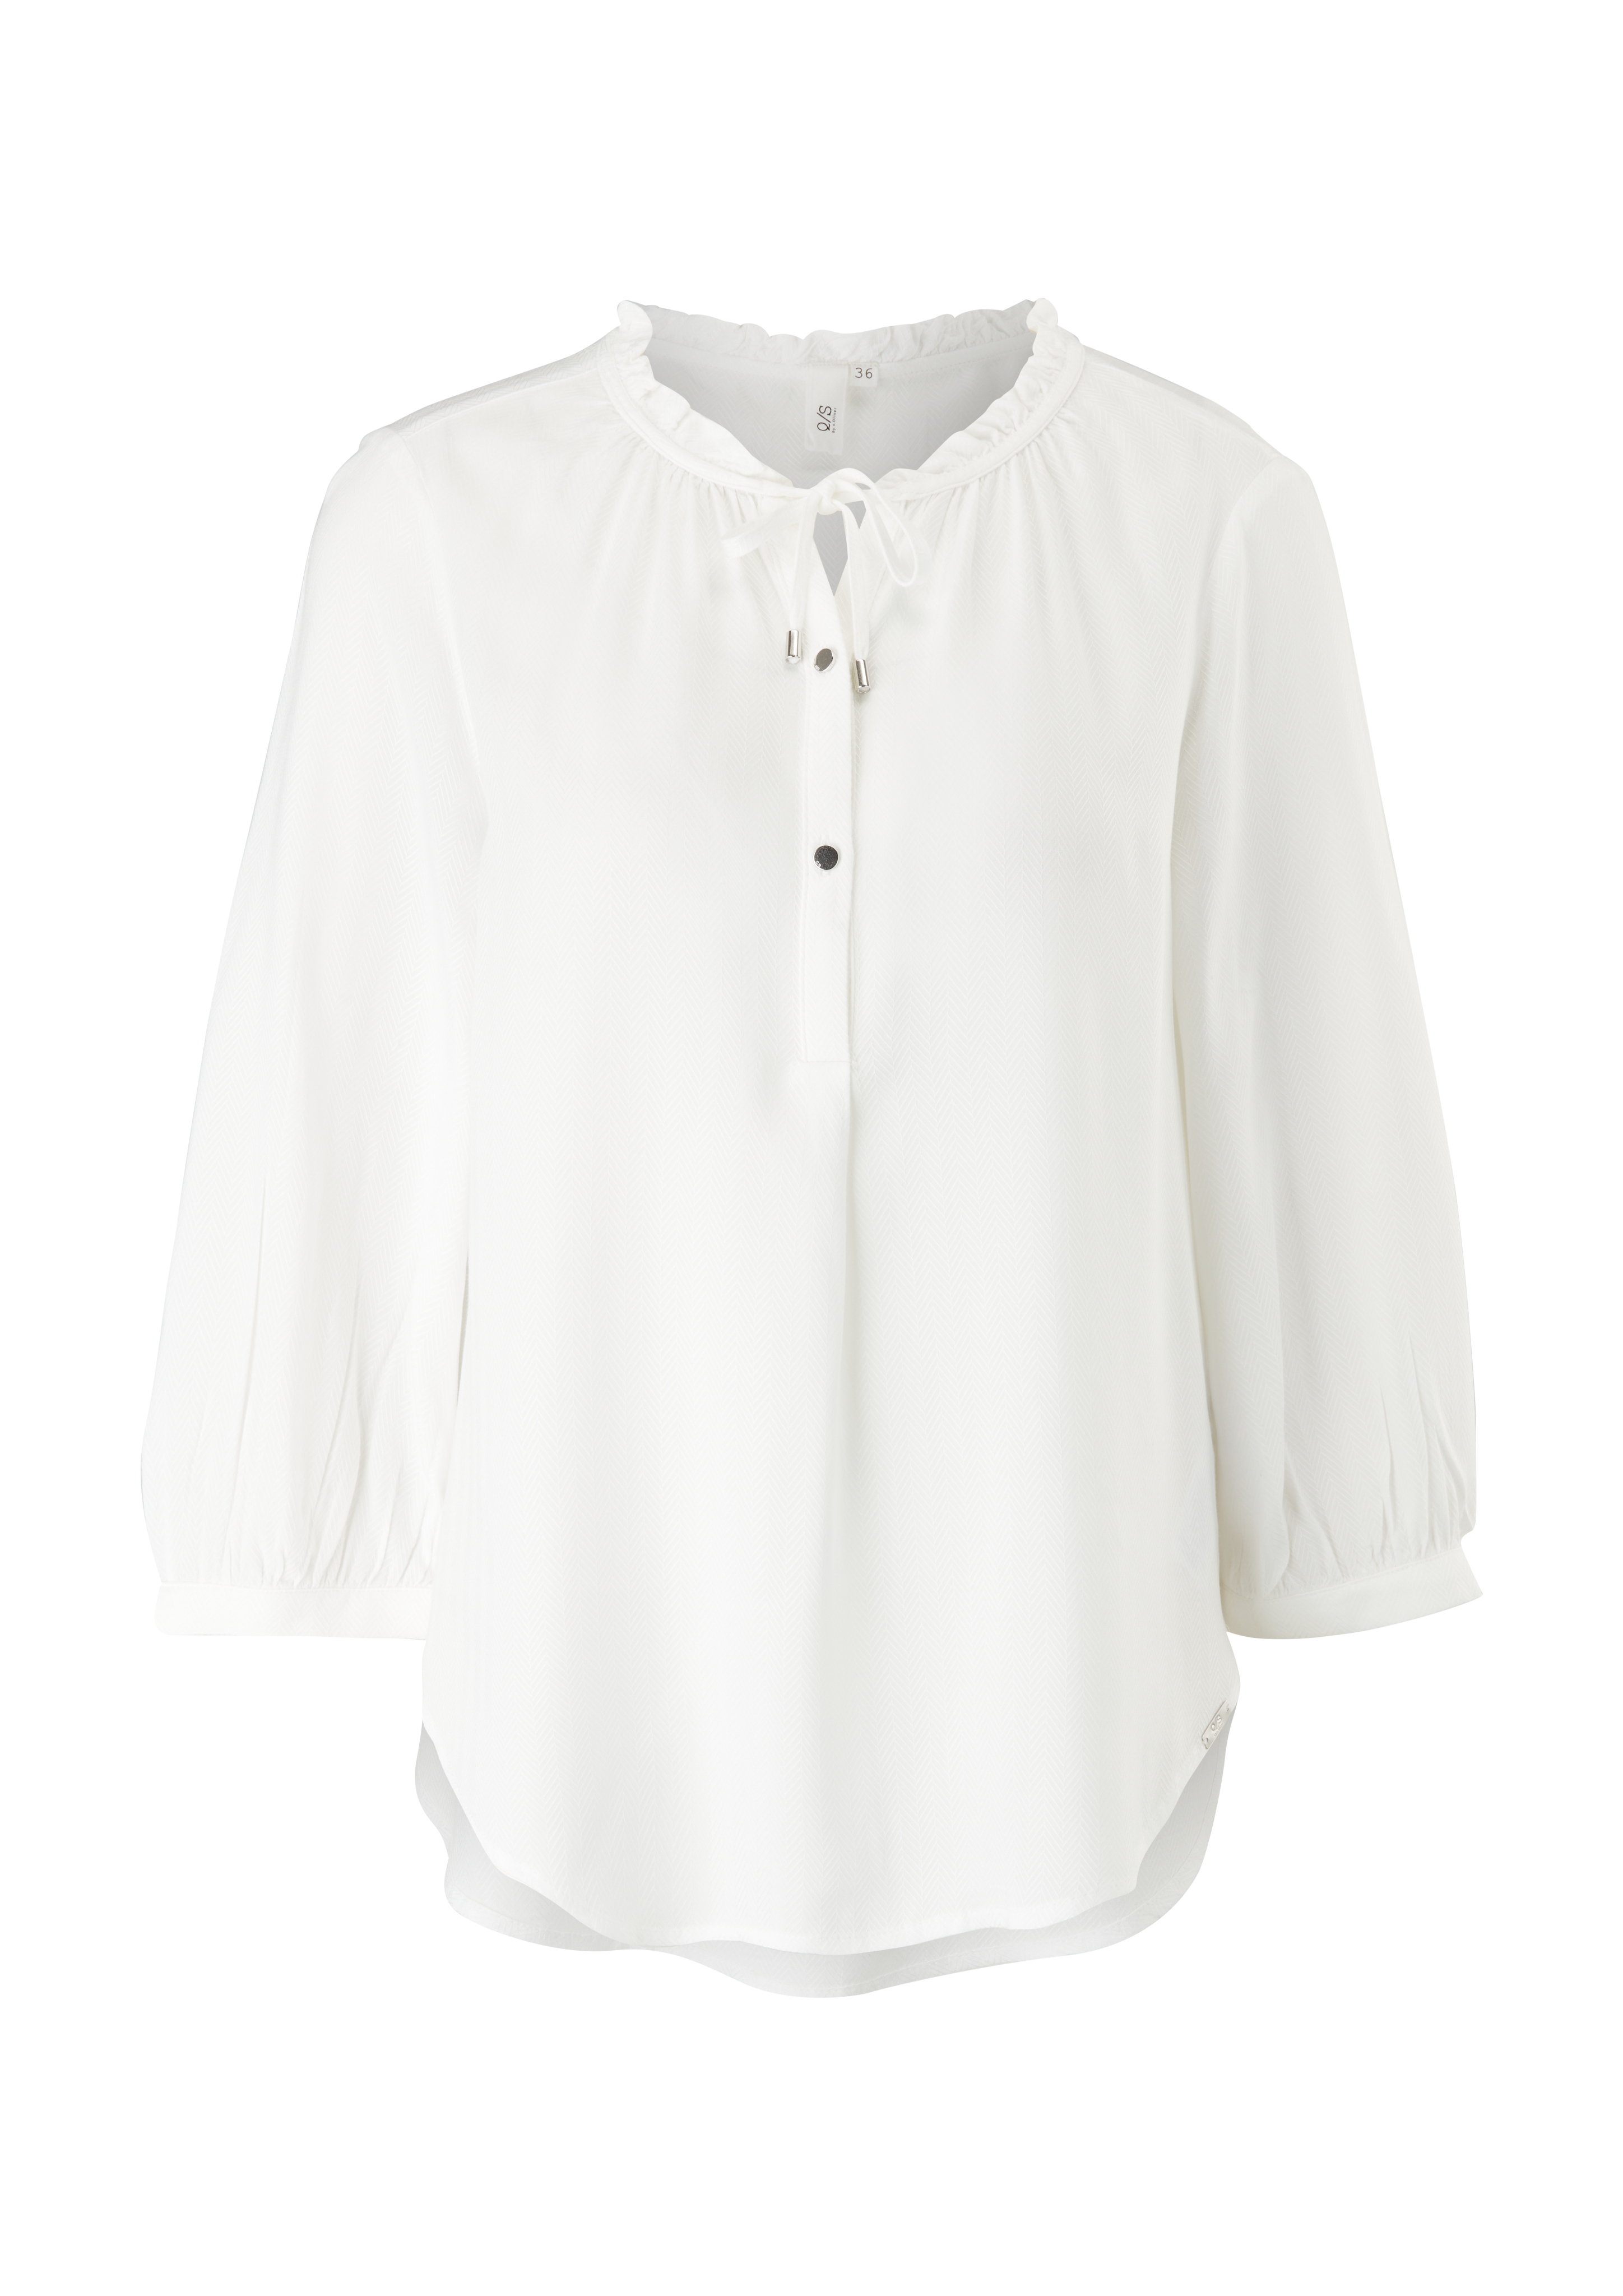 Q/S by s.Oliver Bluse in Offwhite 